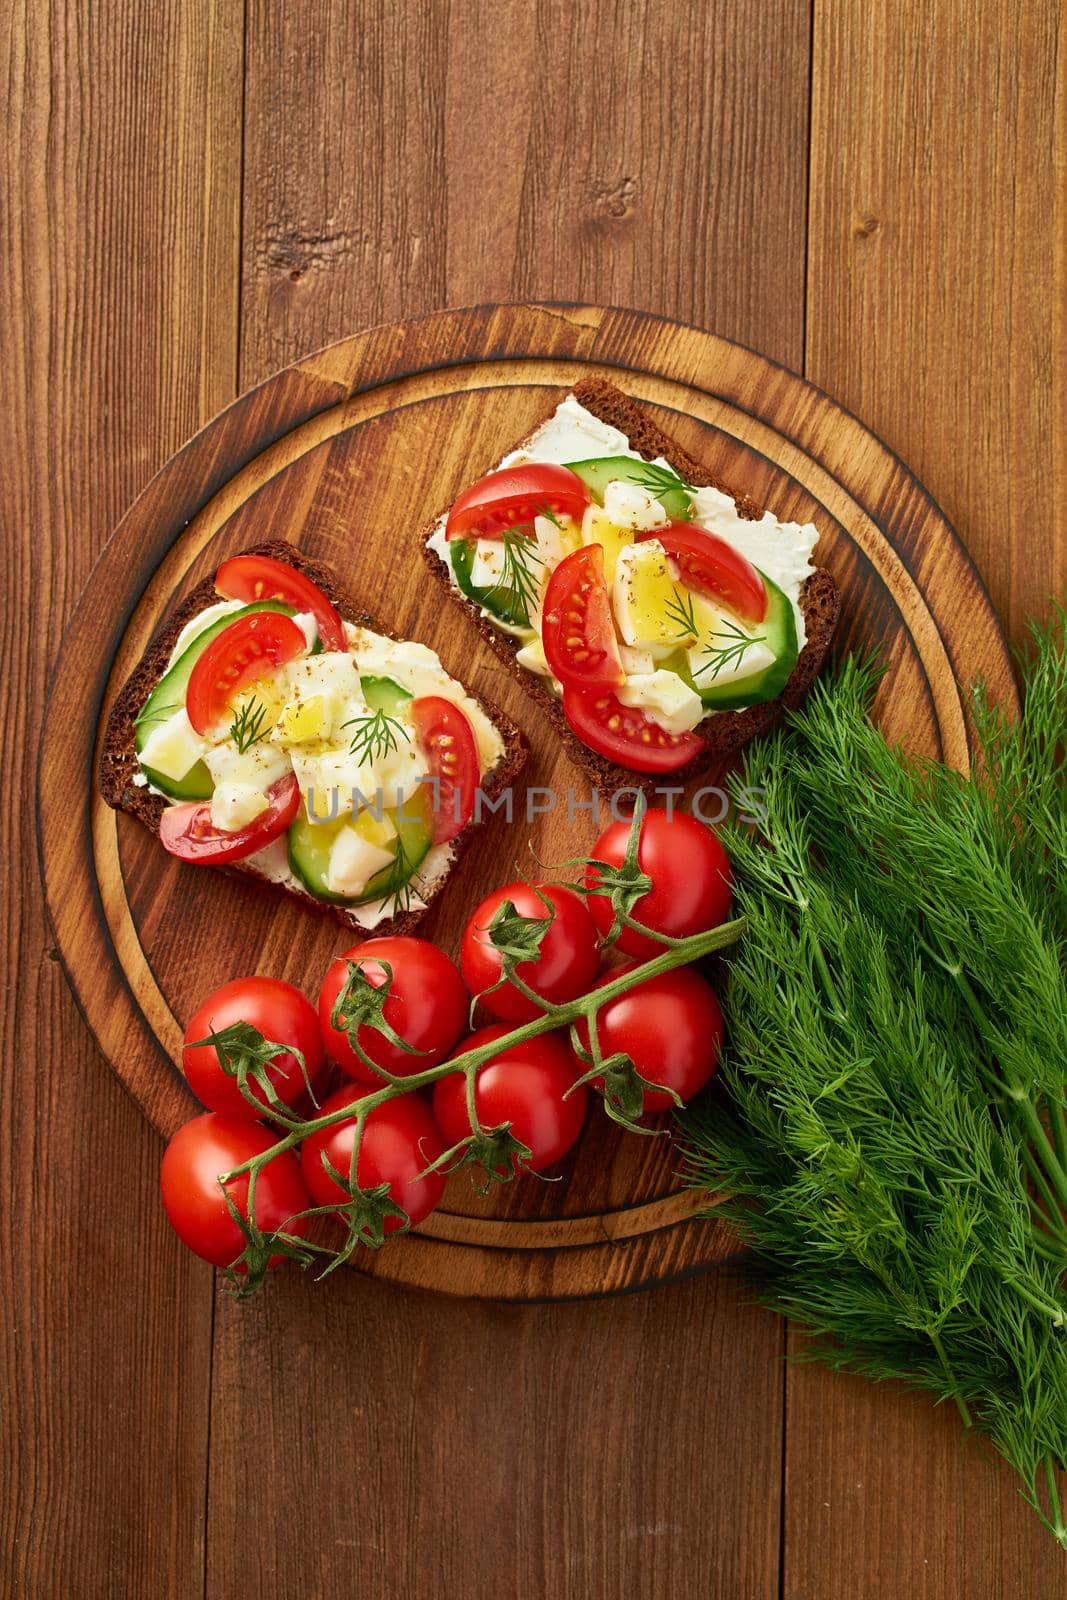 Smorrebrod - traditional Danish sandwiches. Black rye bread with boiled egg, cream cheese, cucumber, tomatoes on dark brown wooden background, top view